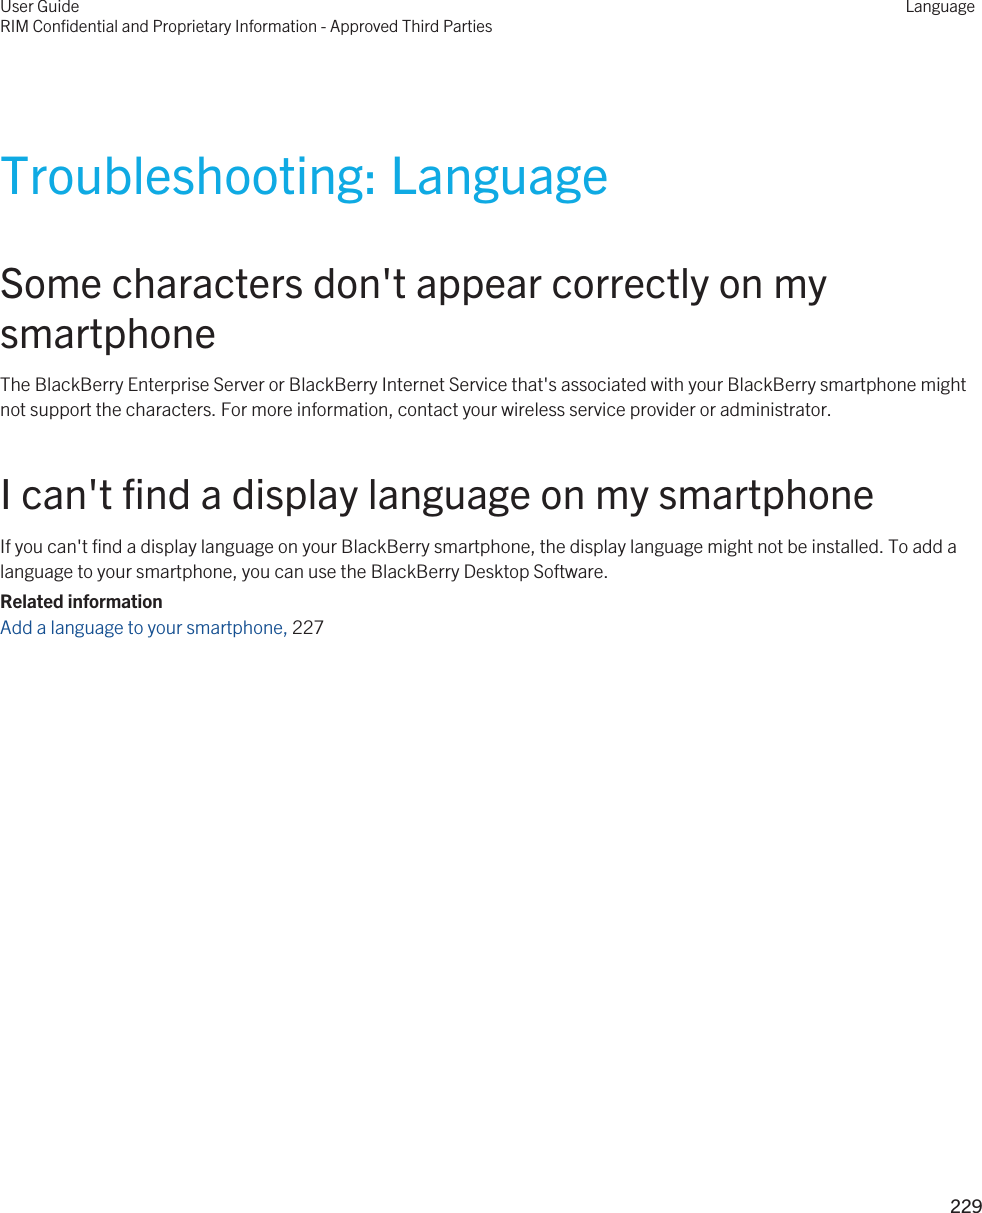 Troubleshooting: LanguageSome characters don&apos;t appear correctly on my smartphoneThe BlackBerry Enterprise Server or BlackBerry Internet Service that&apos;s associated with your BlackBerry smartphone might not support the characters. For more information, contact your wireless service provider or administrator.I can&apos;t find a display language on my smartphoneIf you can&apos;t find a display language on your BlackBerry smartphone, the display language might not be installed. To add a language to your smartphone, you can use the BlackBerry Desktop Software.Related informationAdd a language to your smartphone, 227 User GuideRIM Confidential and Proprietary Information - Approved Third PartiesLanguage229 